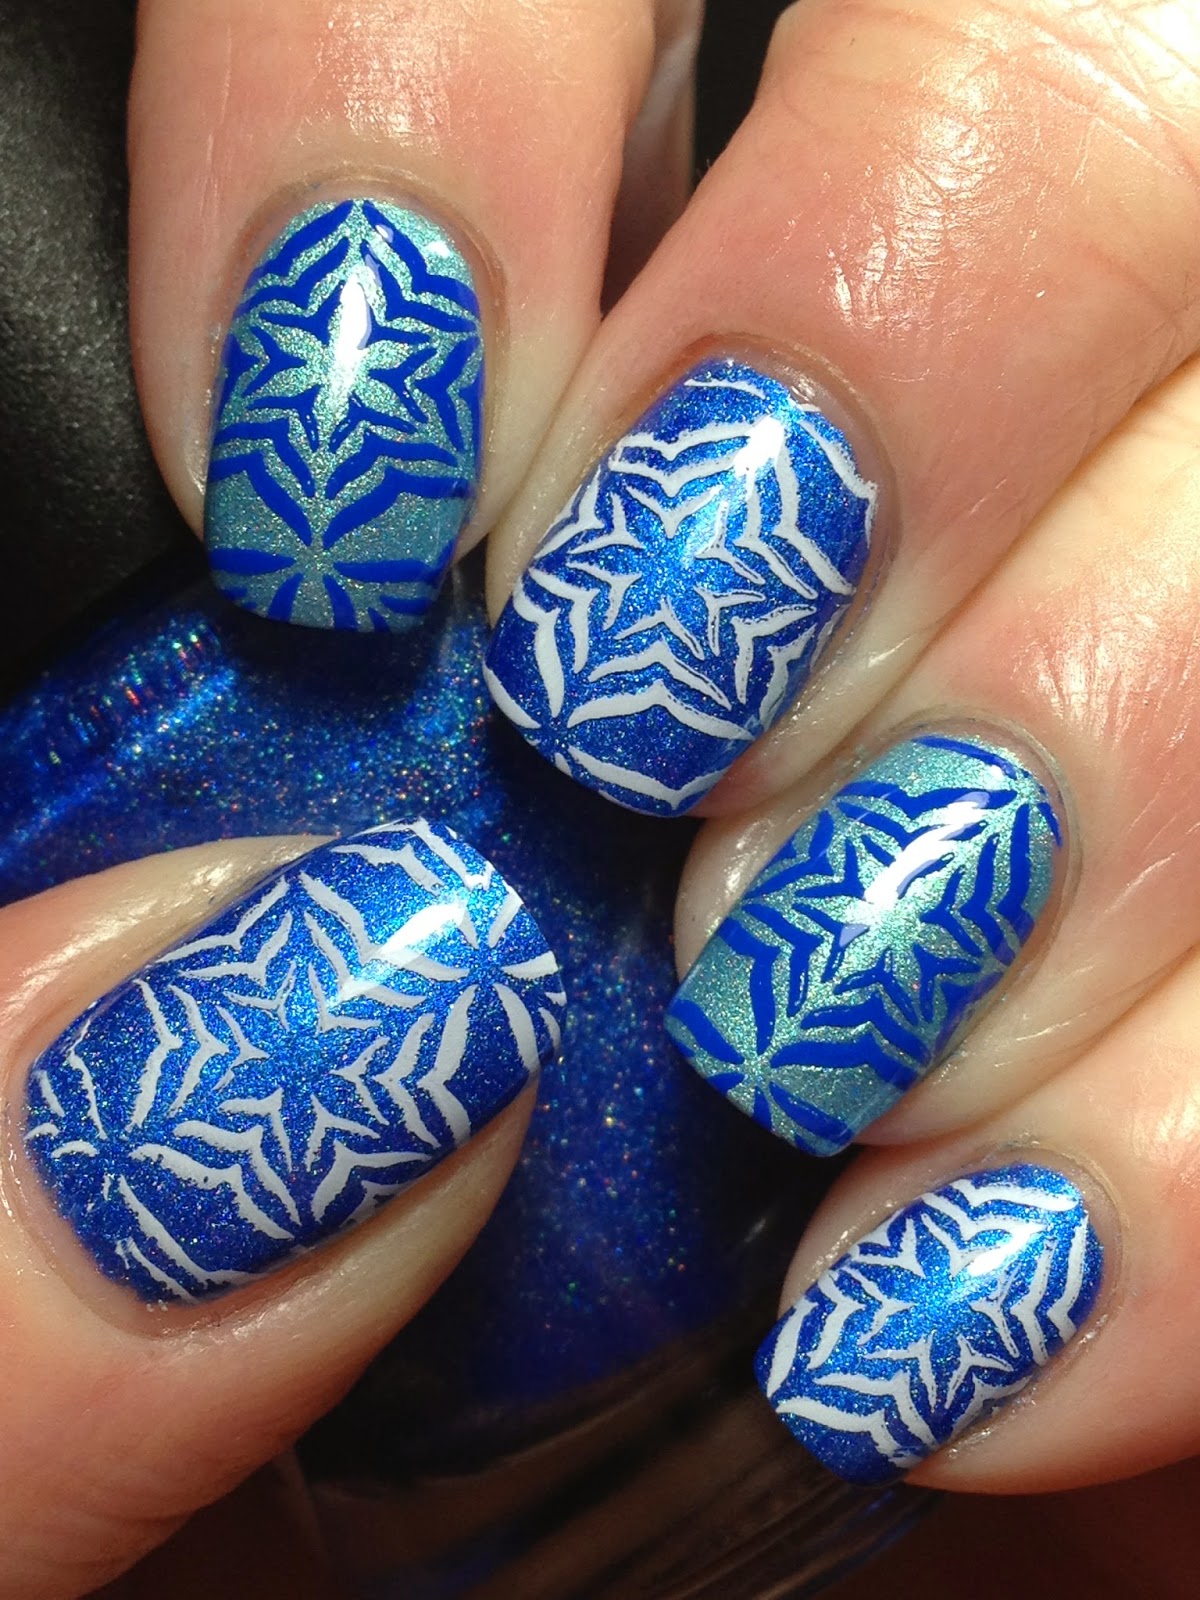 Canadian Nail Fanatic: Two Blue Mani's!